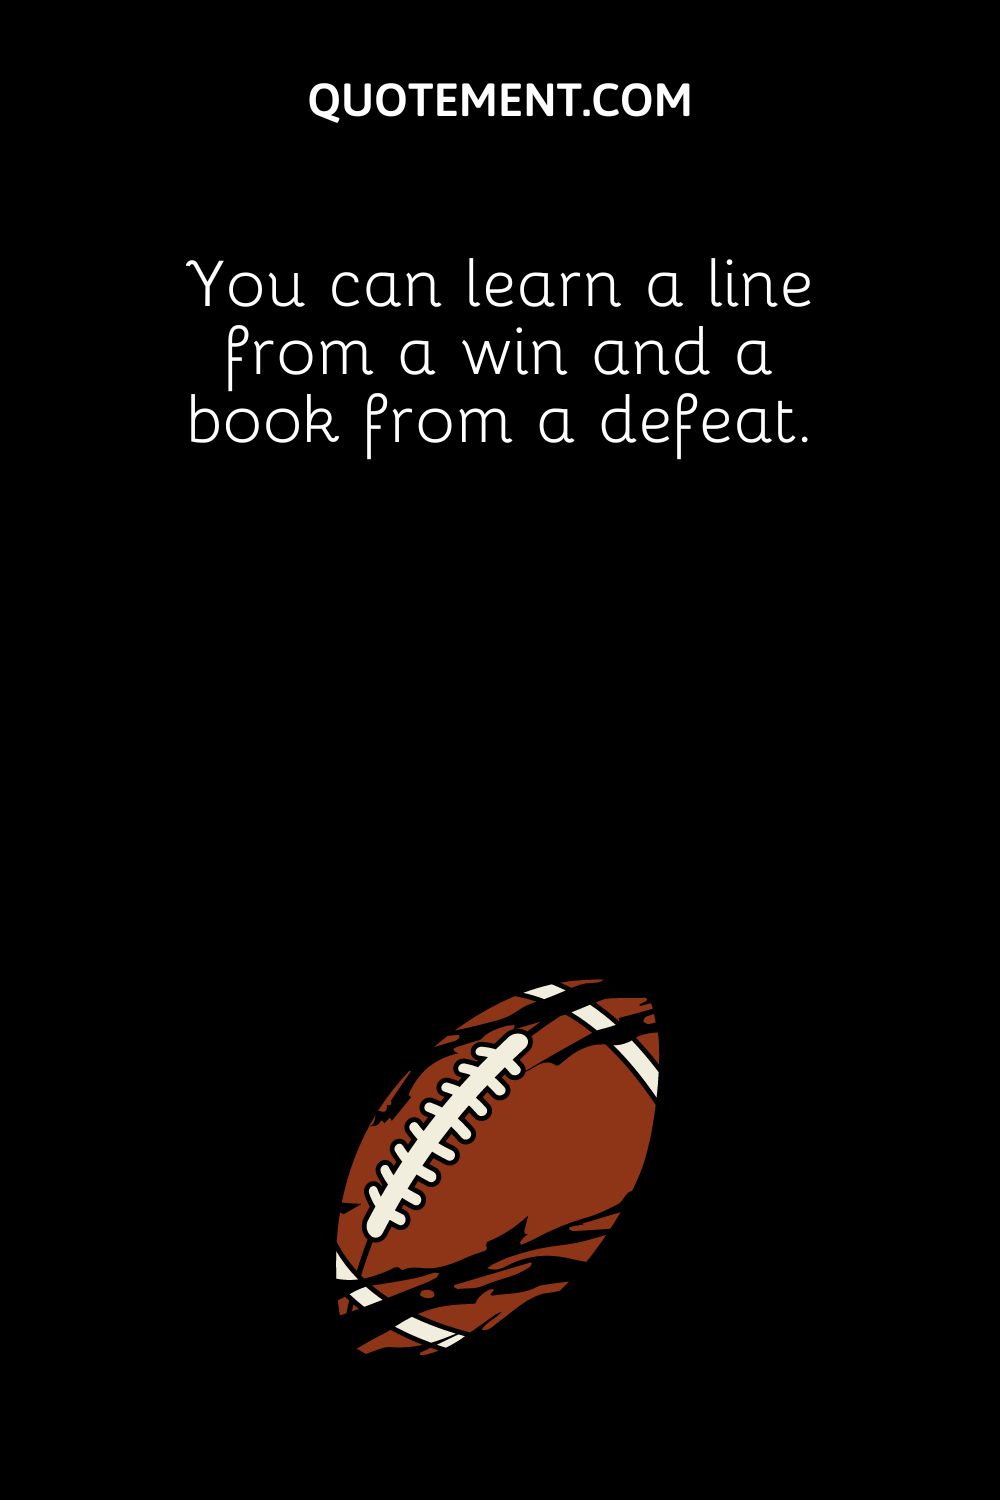 You can learn a line from a win and a book from a defeat